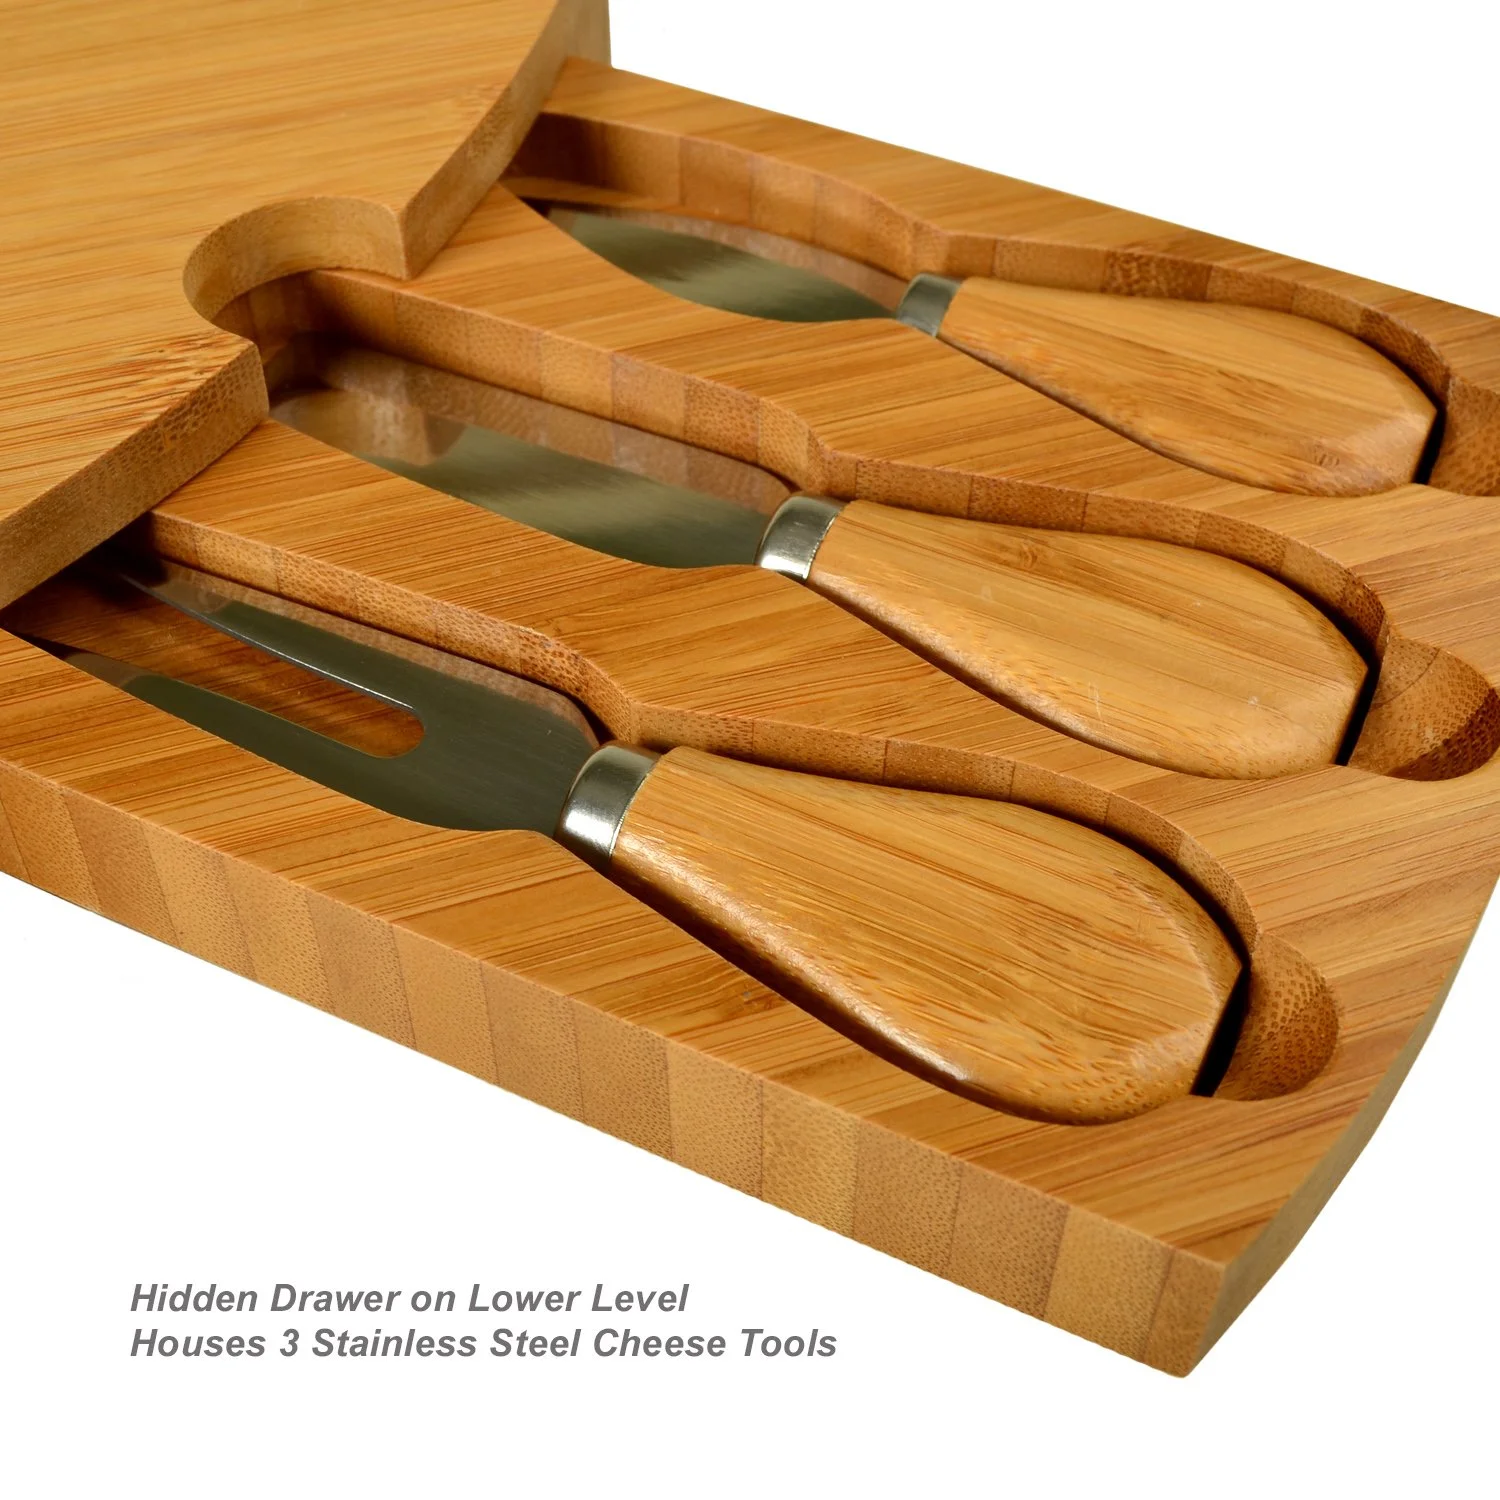 Customized High Quality Bamboo Cutting Board with Cheese Tools - Spirals from a Compact Wedge to 18